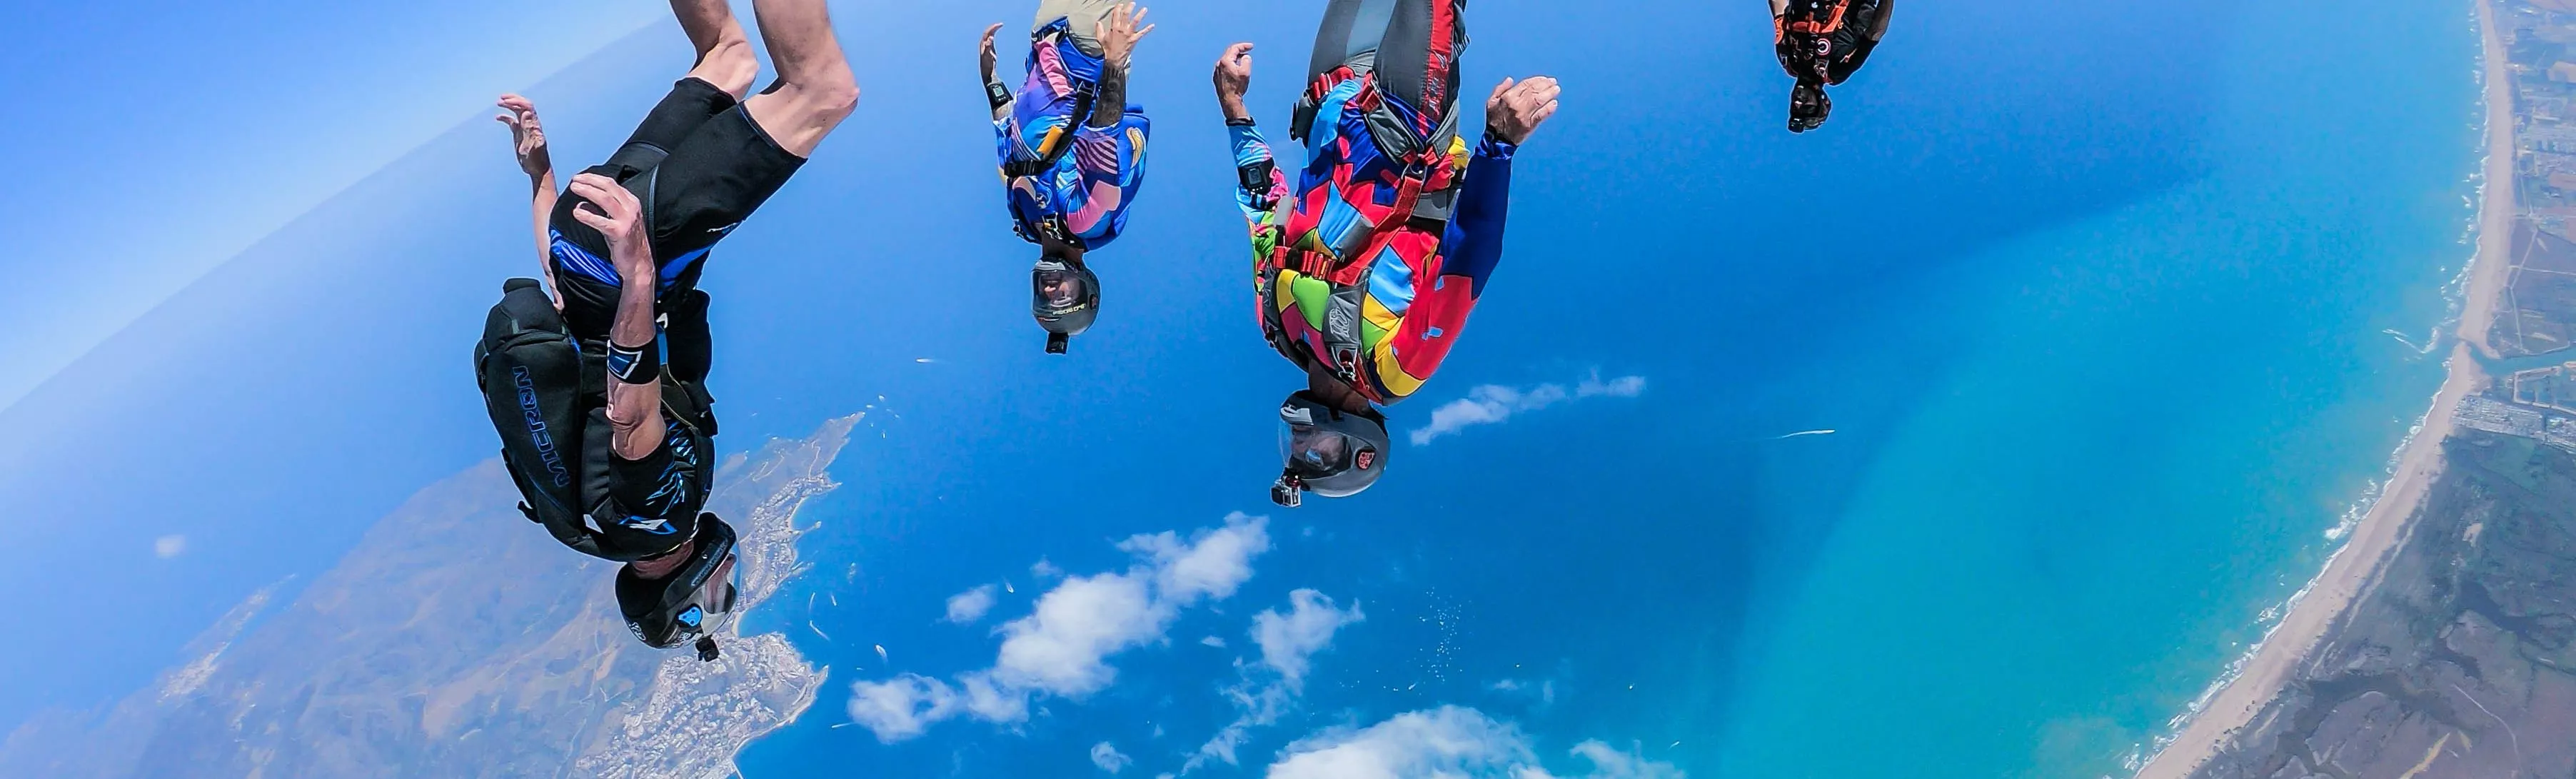 Skydive Fano in Italy, Europe | Skydiving - Rated 4.2